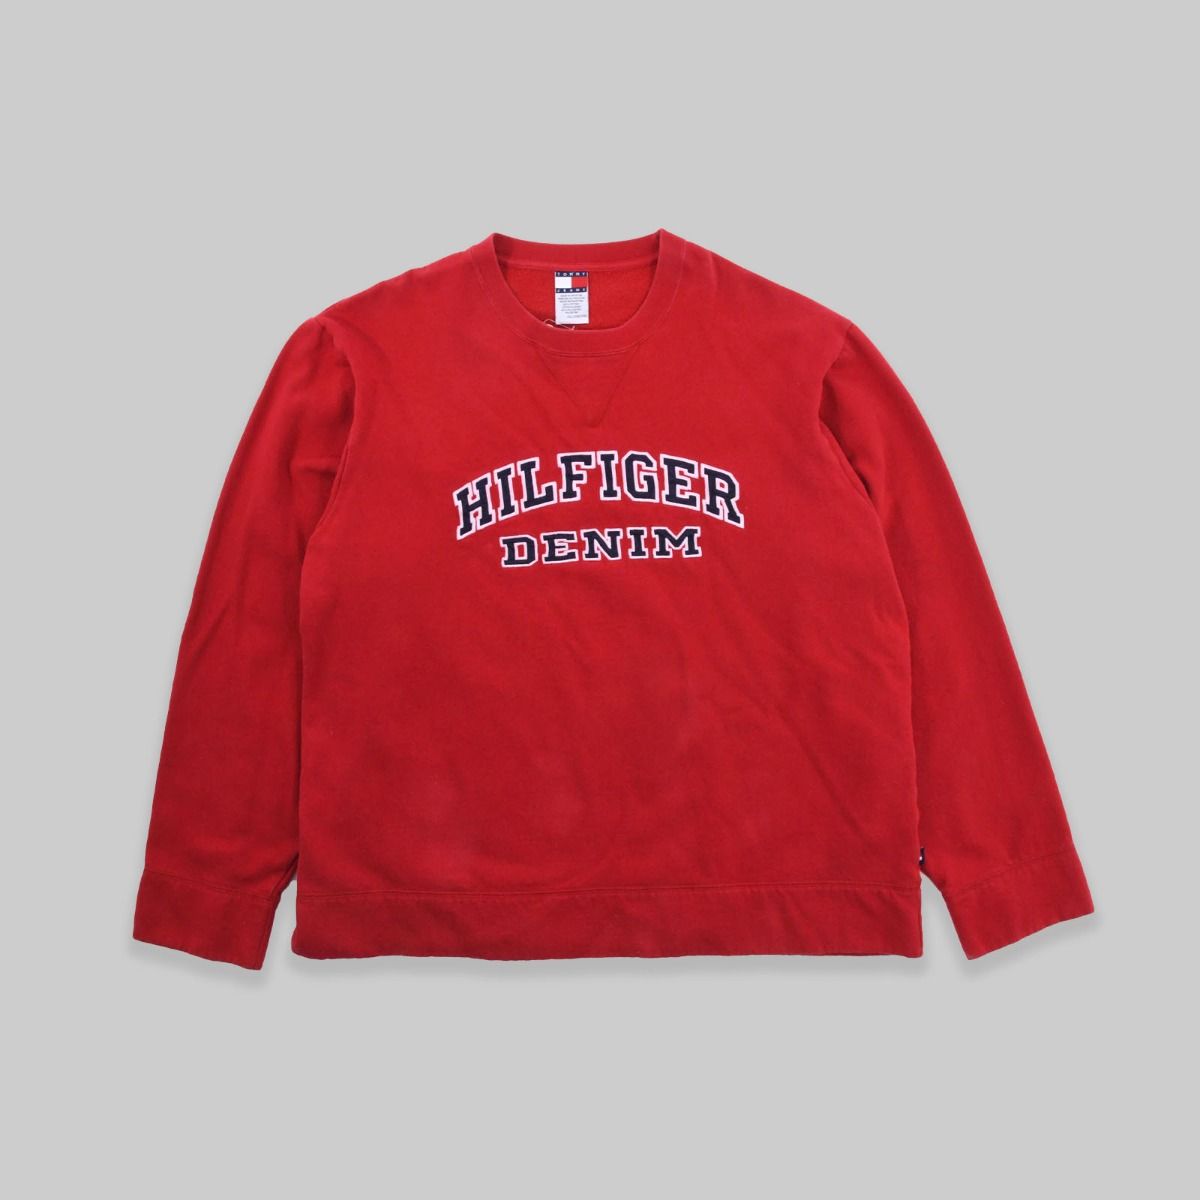 Tommy Hilfiger Sweatshirt (Embroidered spell out design)